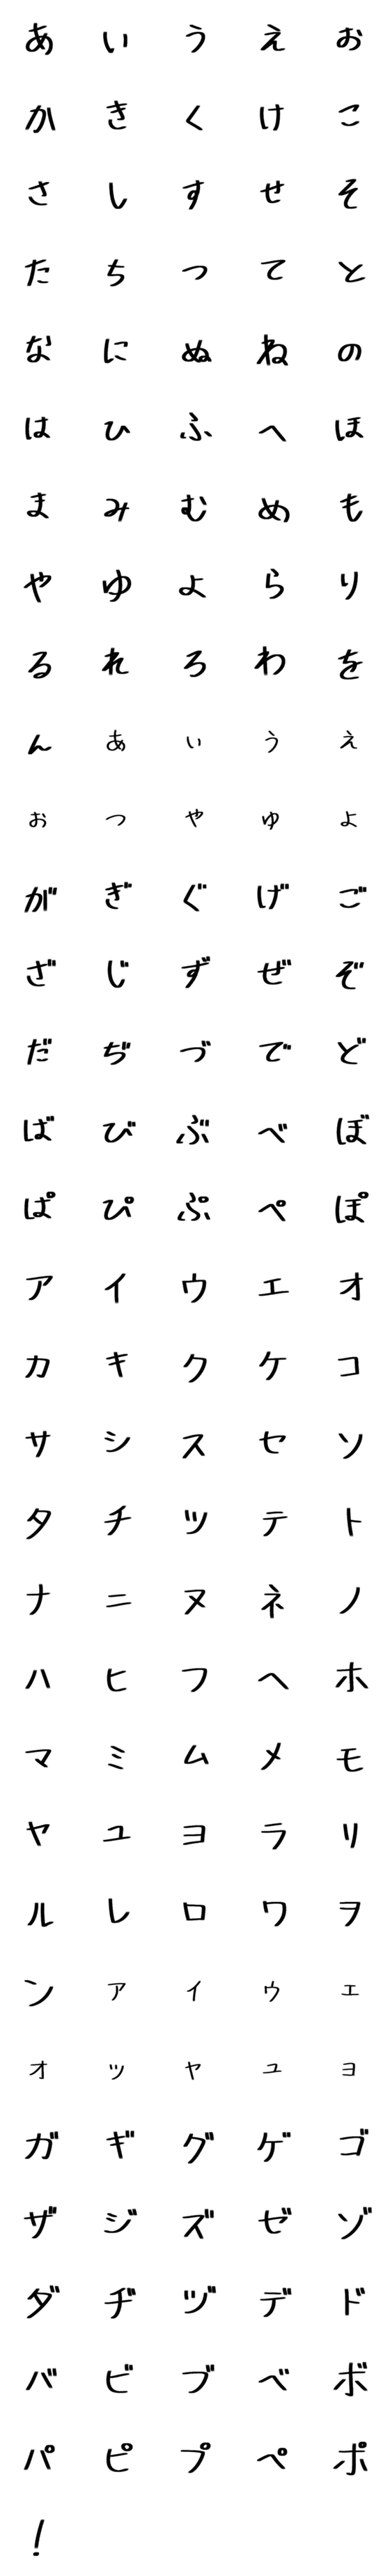 [LINE絵文字]絵文字(手書きマーカー)の画像一覧